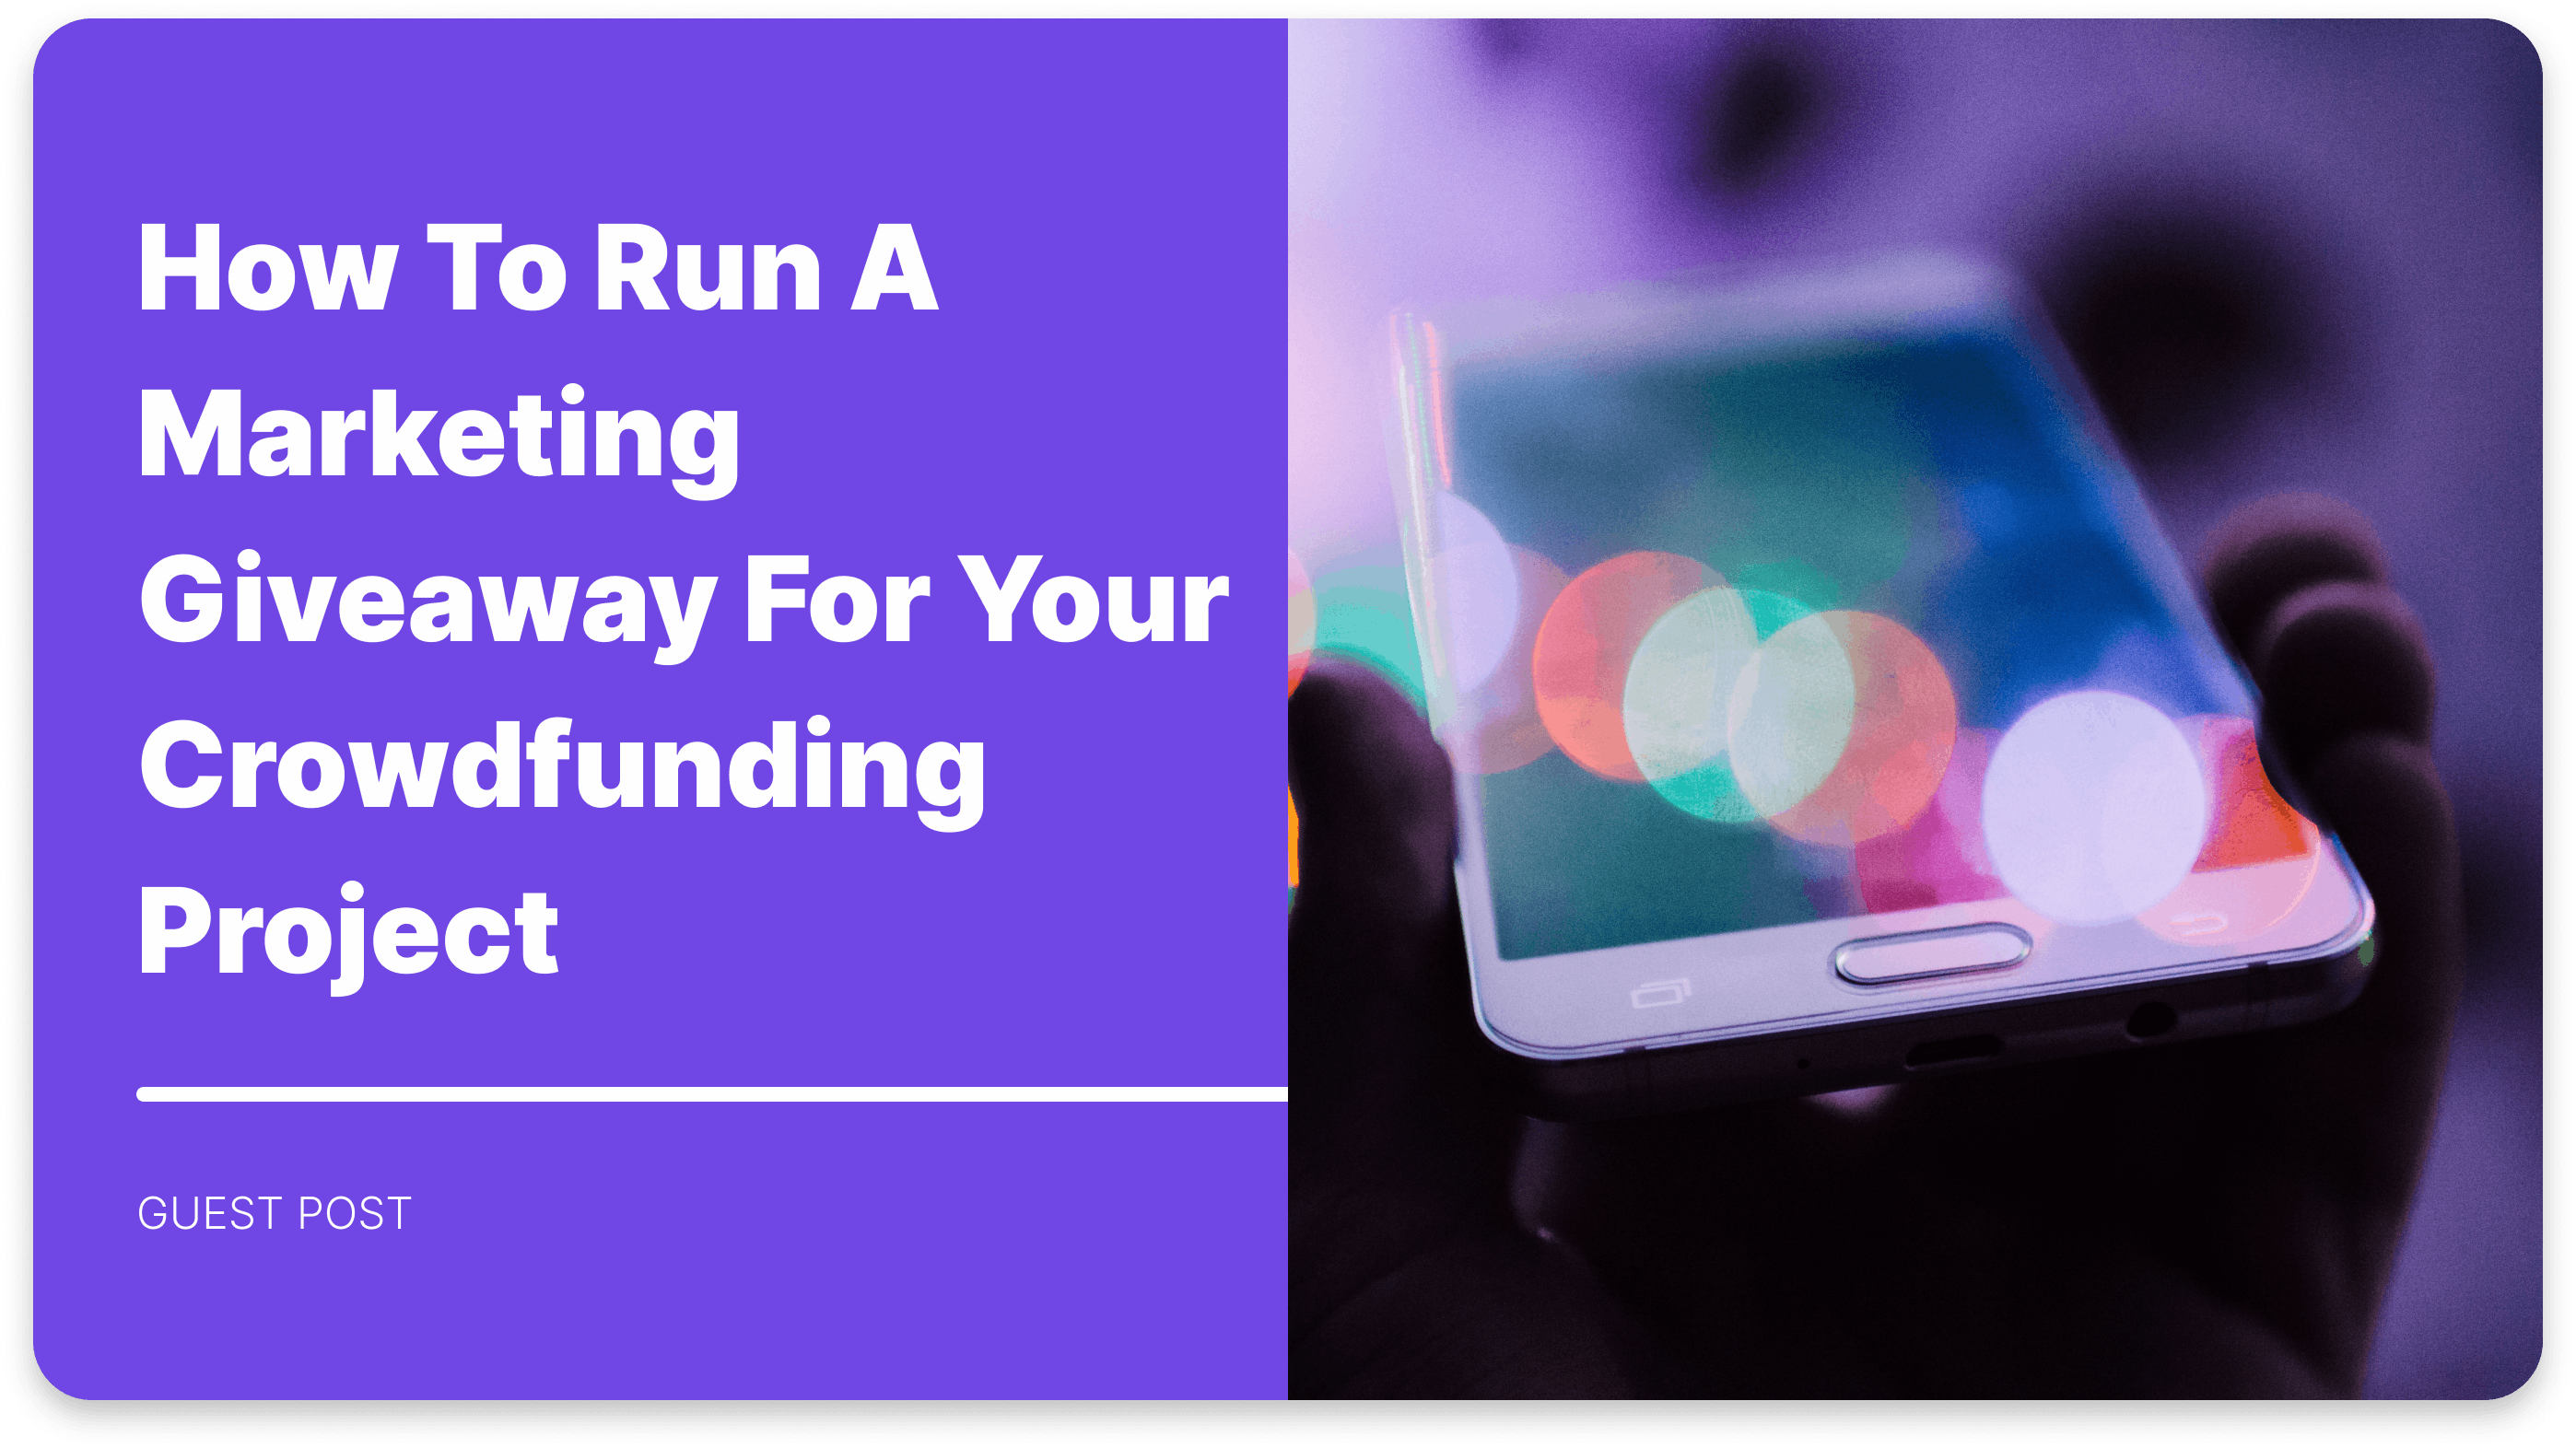 How to Run a Practical Marketing Giveaway For Your Crowdfunding Project